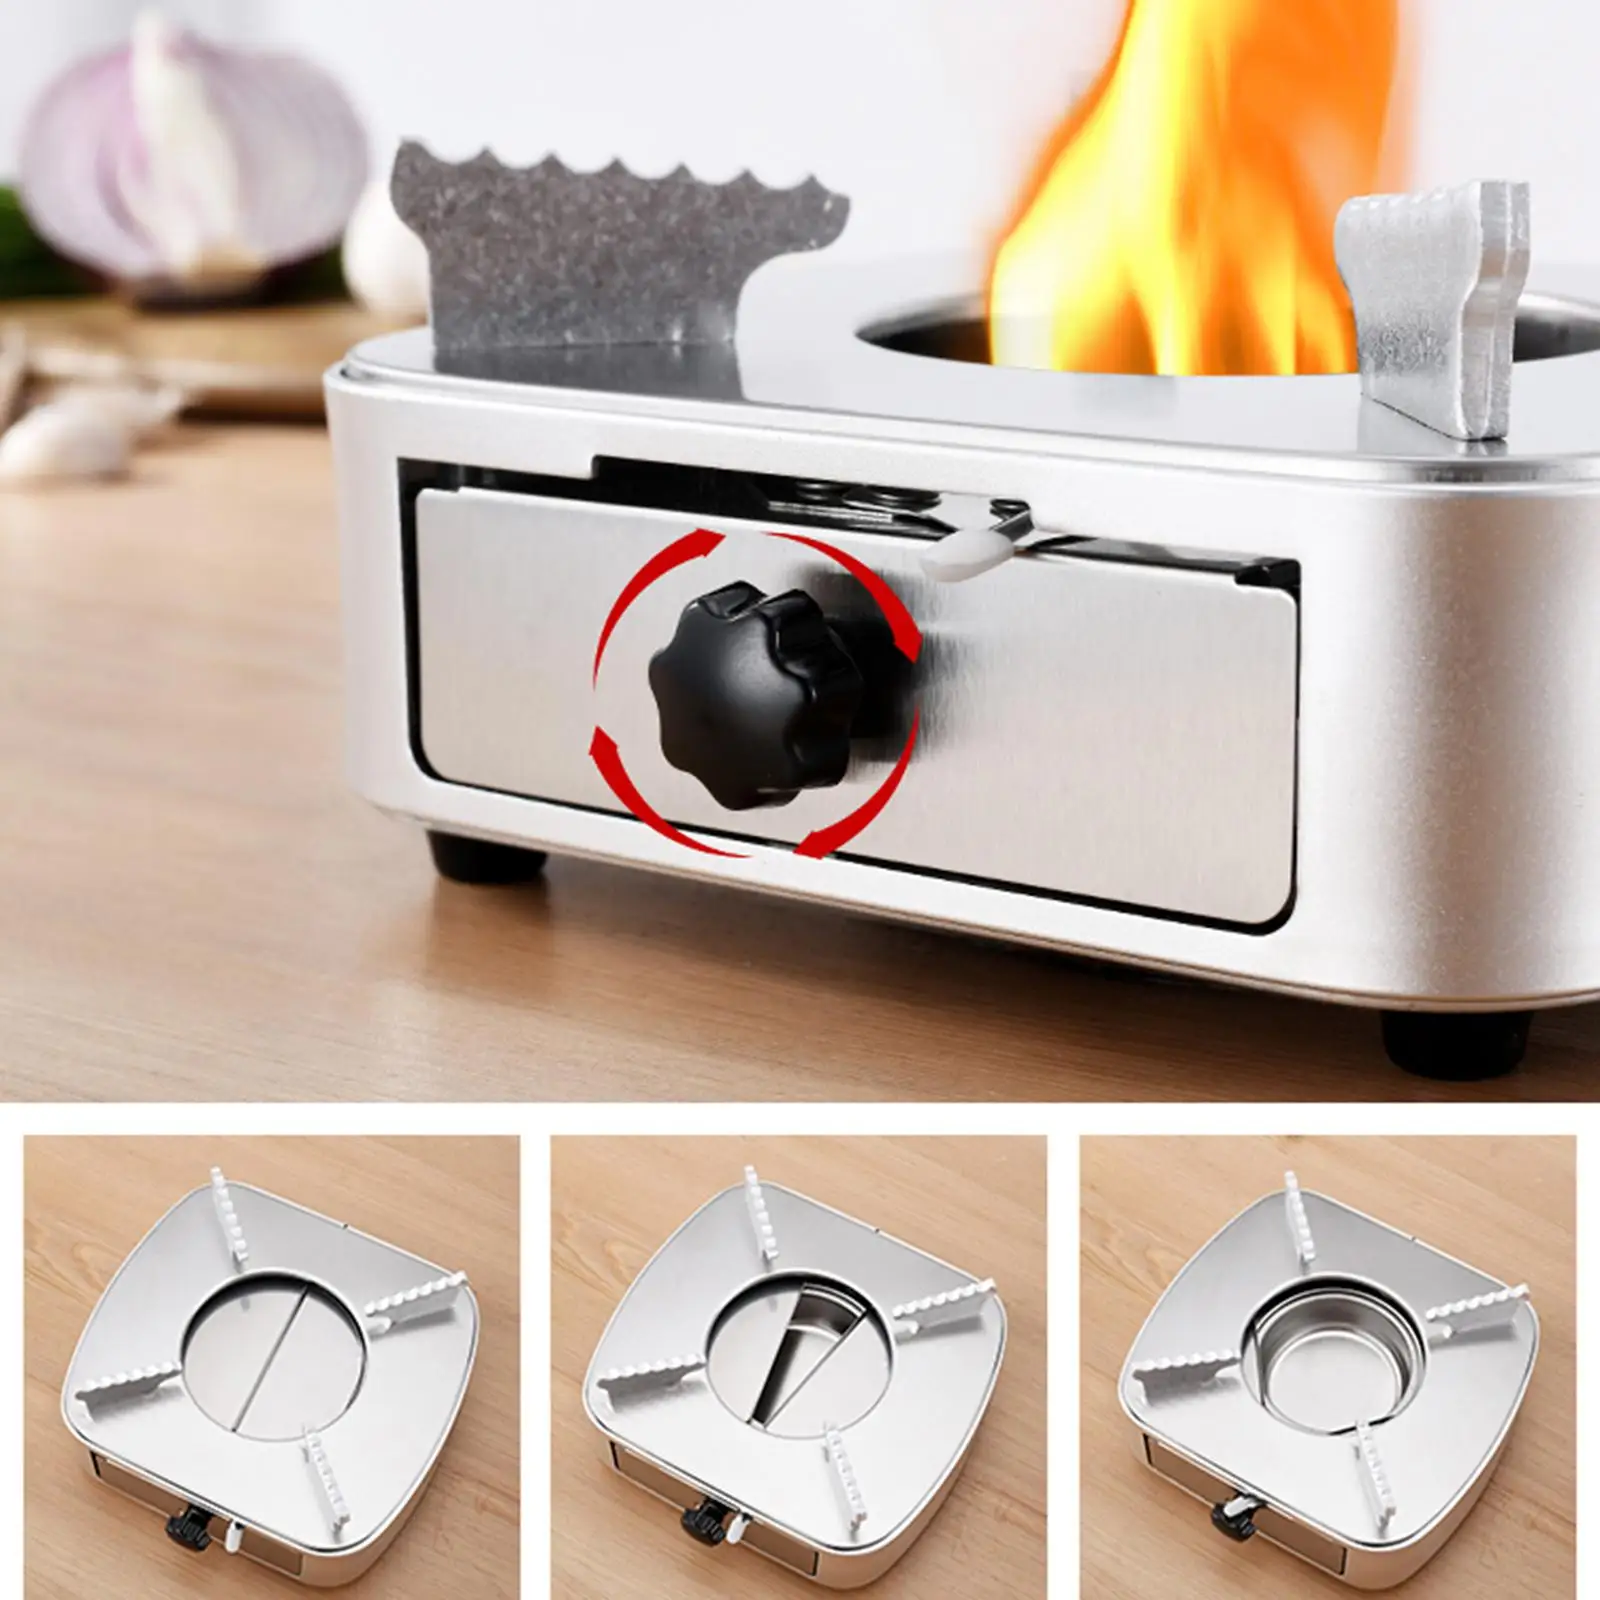 Mini Alcohol Stove Aluminum Alloy Windproof Furnace For Picnic Camping Backpackers Grills Burner Rug Bench Alcohol Camp Stove